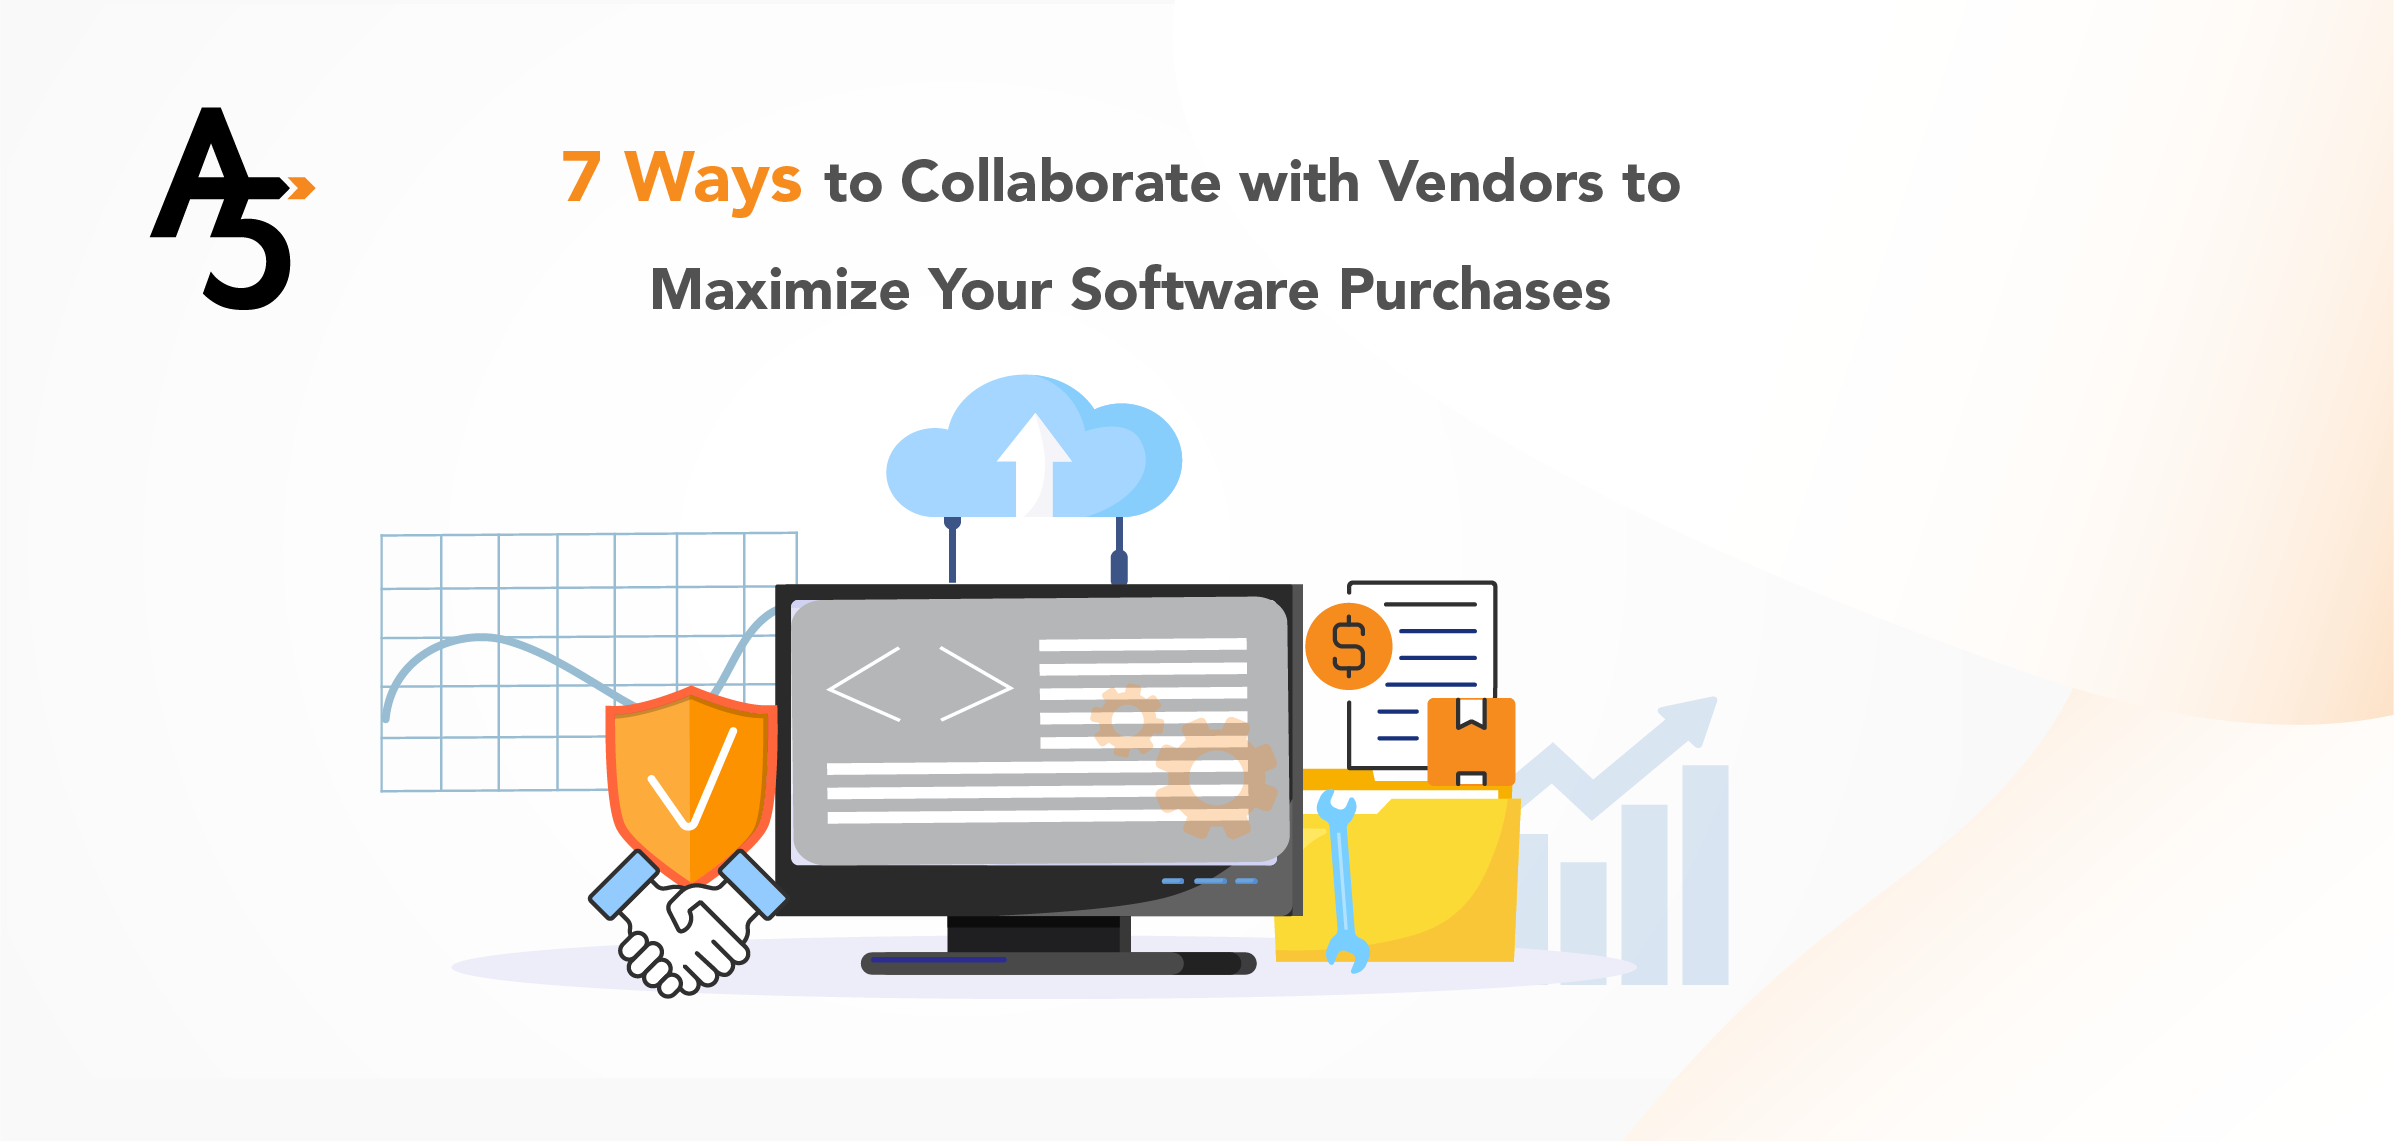 7 ways to Collaborate with Vendors to maximize your software purchases image